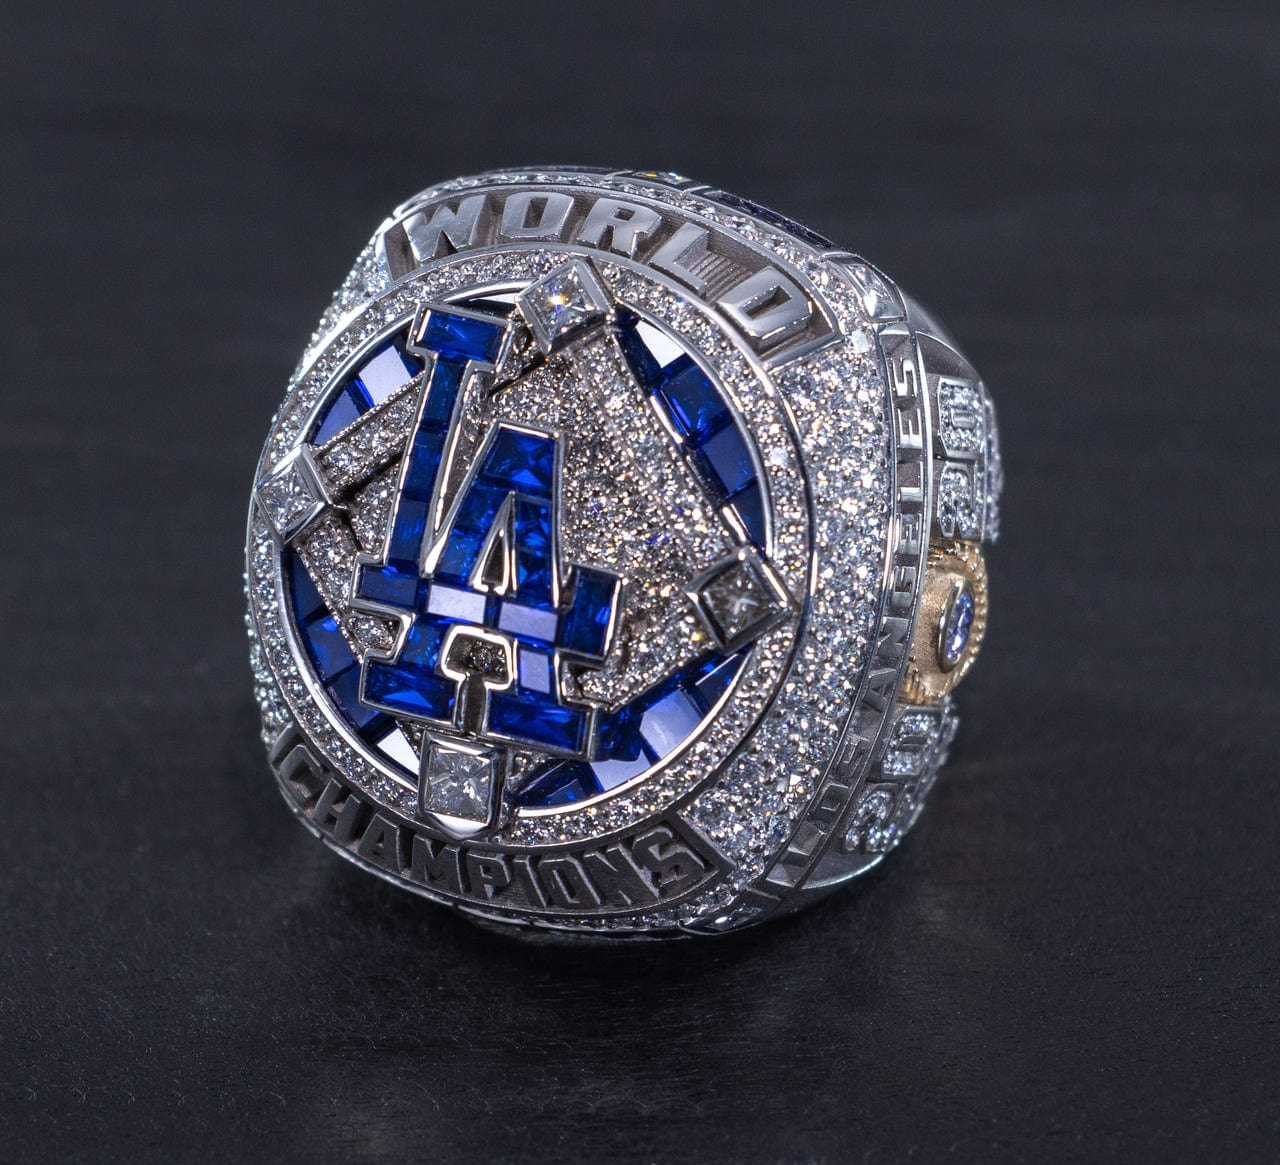 L.A. Dodgers Get Icy World Series Rings, More Than 100 Diamonds